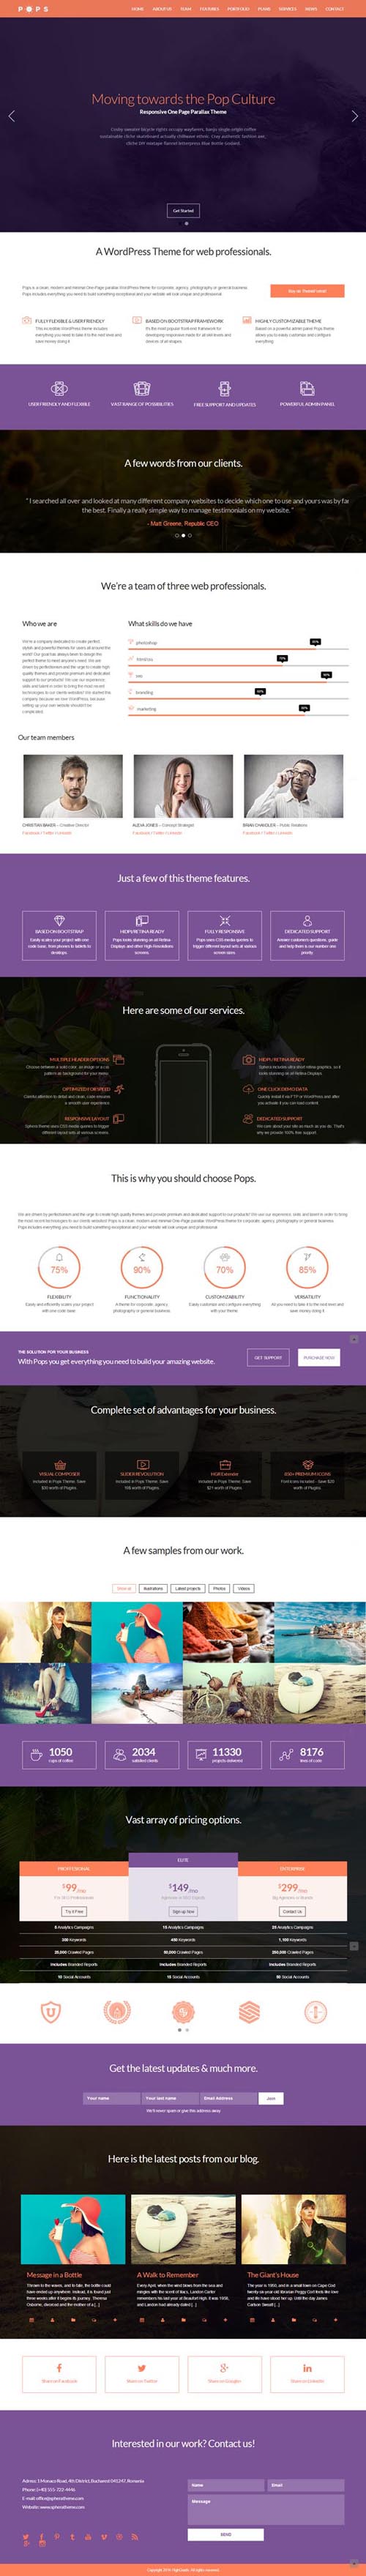 Pops - Responsive One Page Parallax Theme